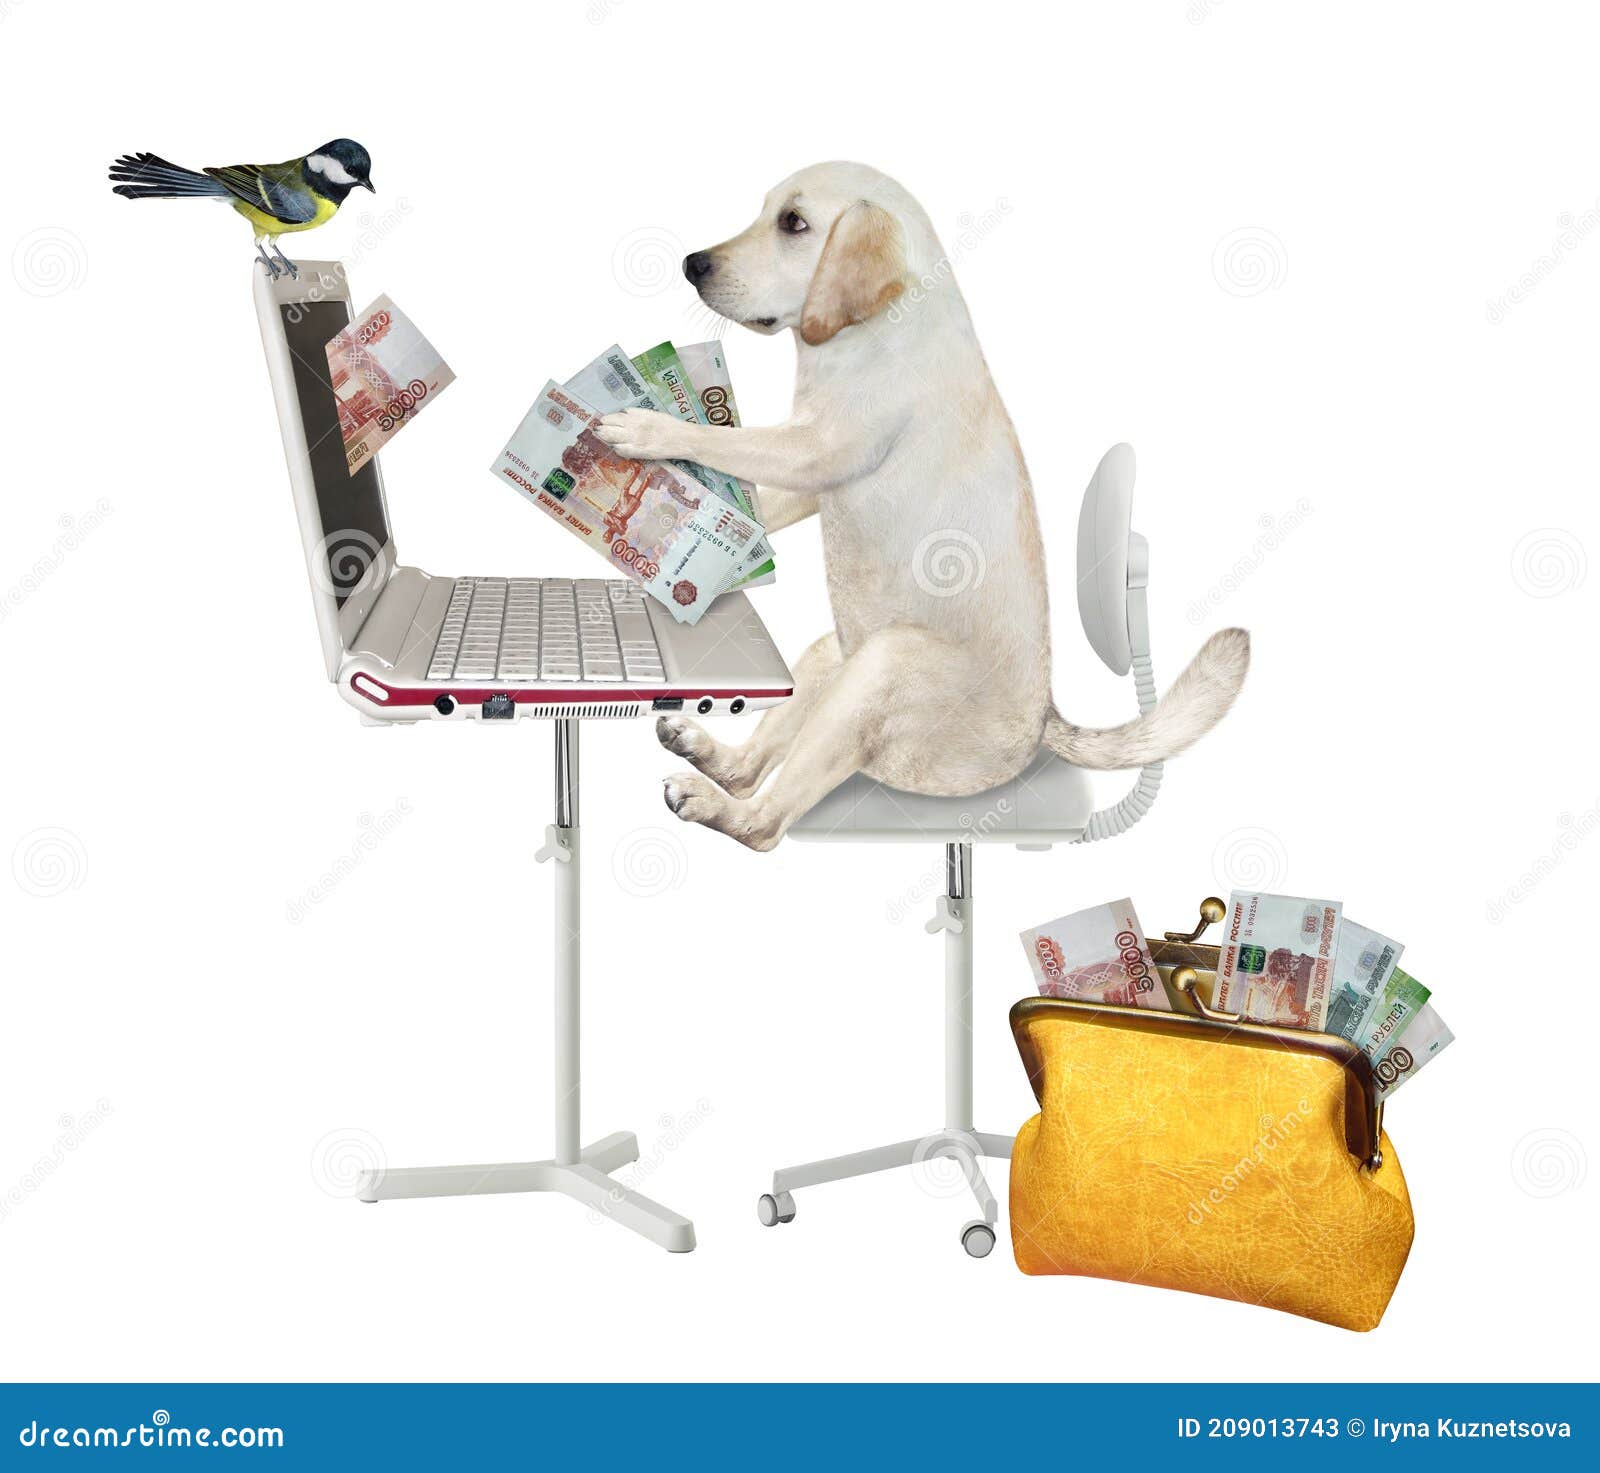 dog earns rubles from laptop 2